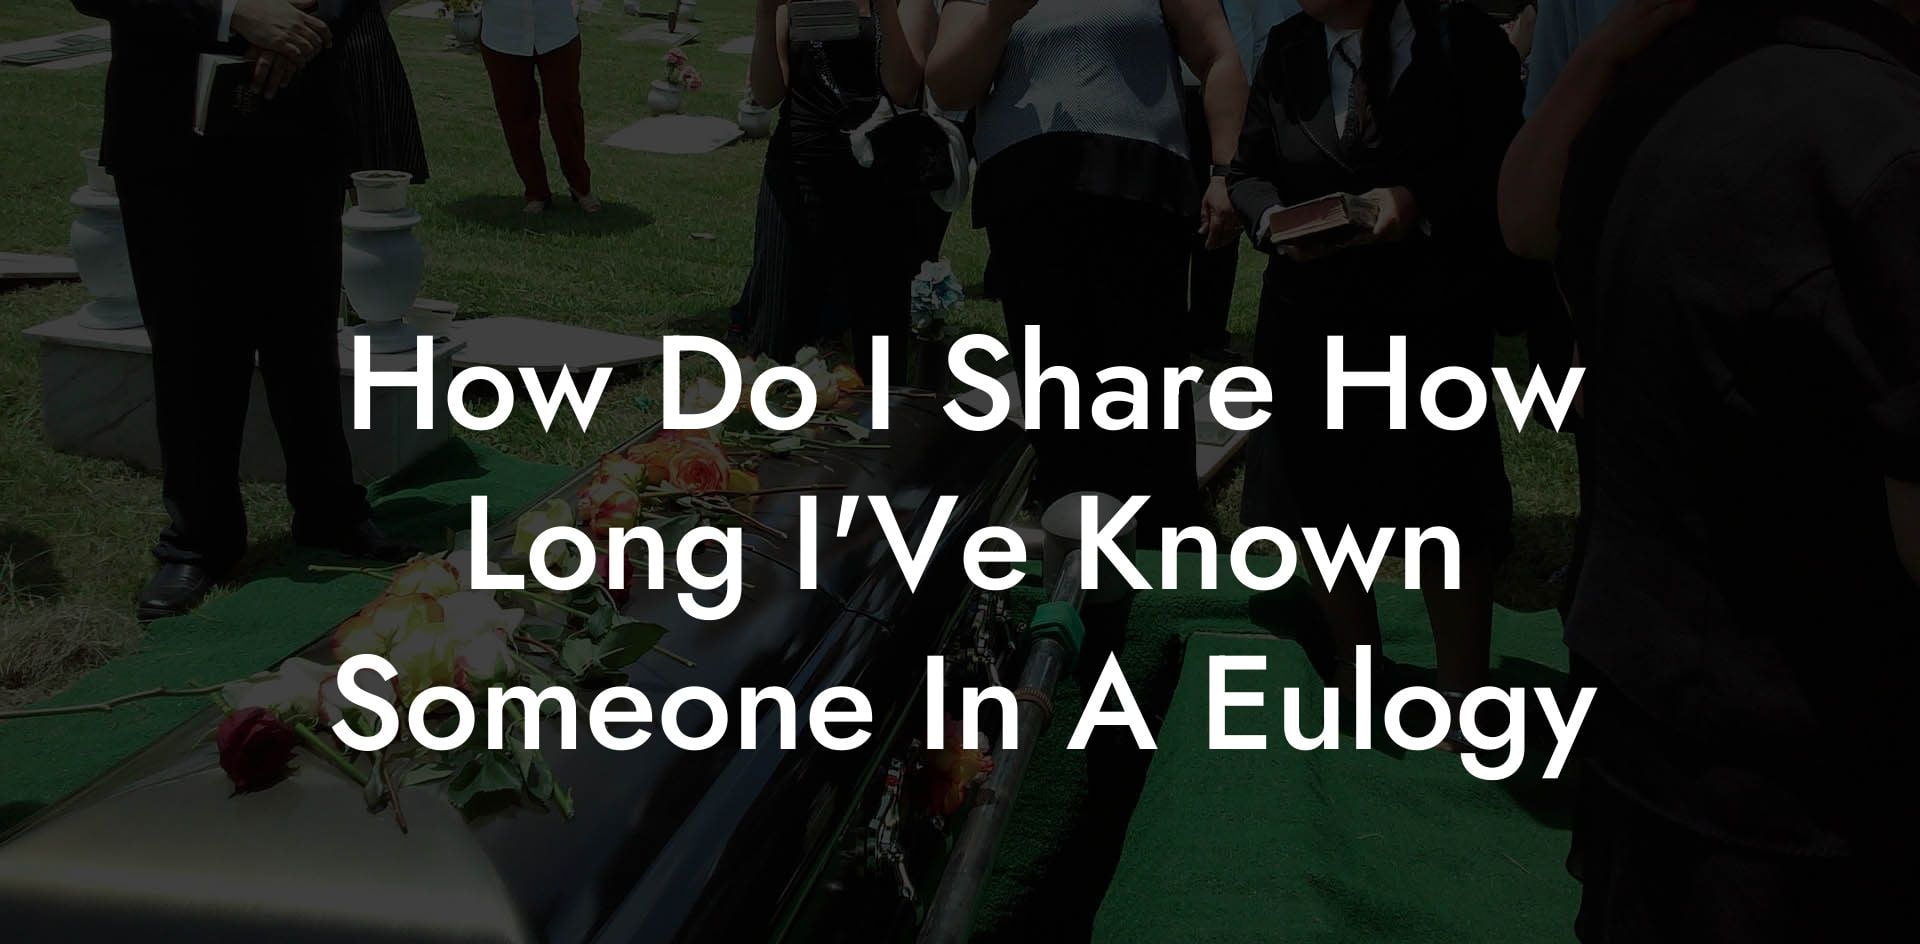 How Do I Share How Long I'Ve Known Someone In A Eulogy